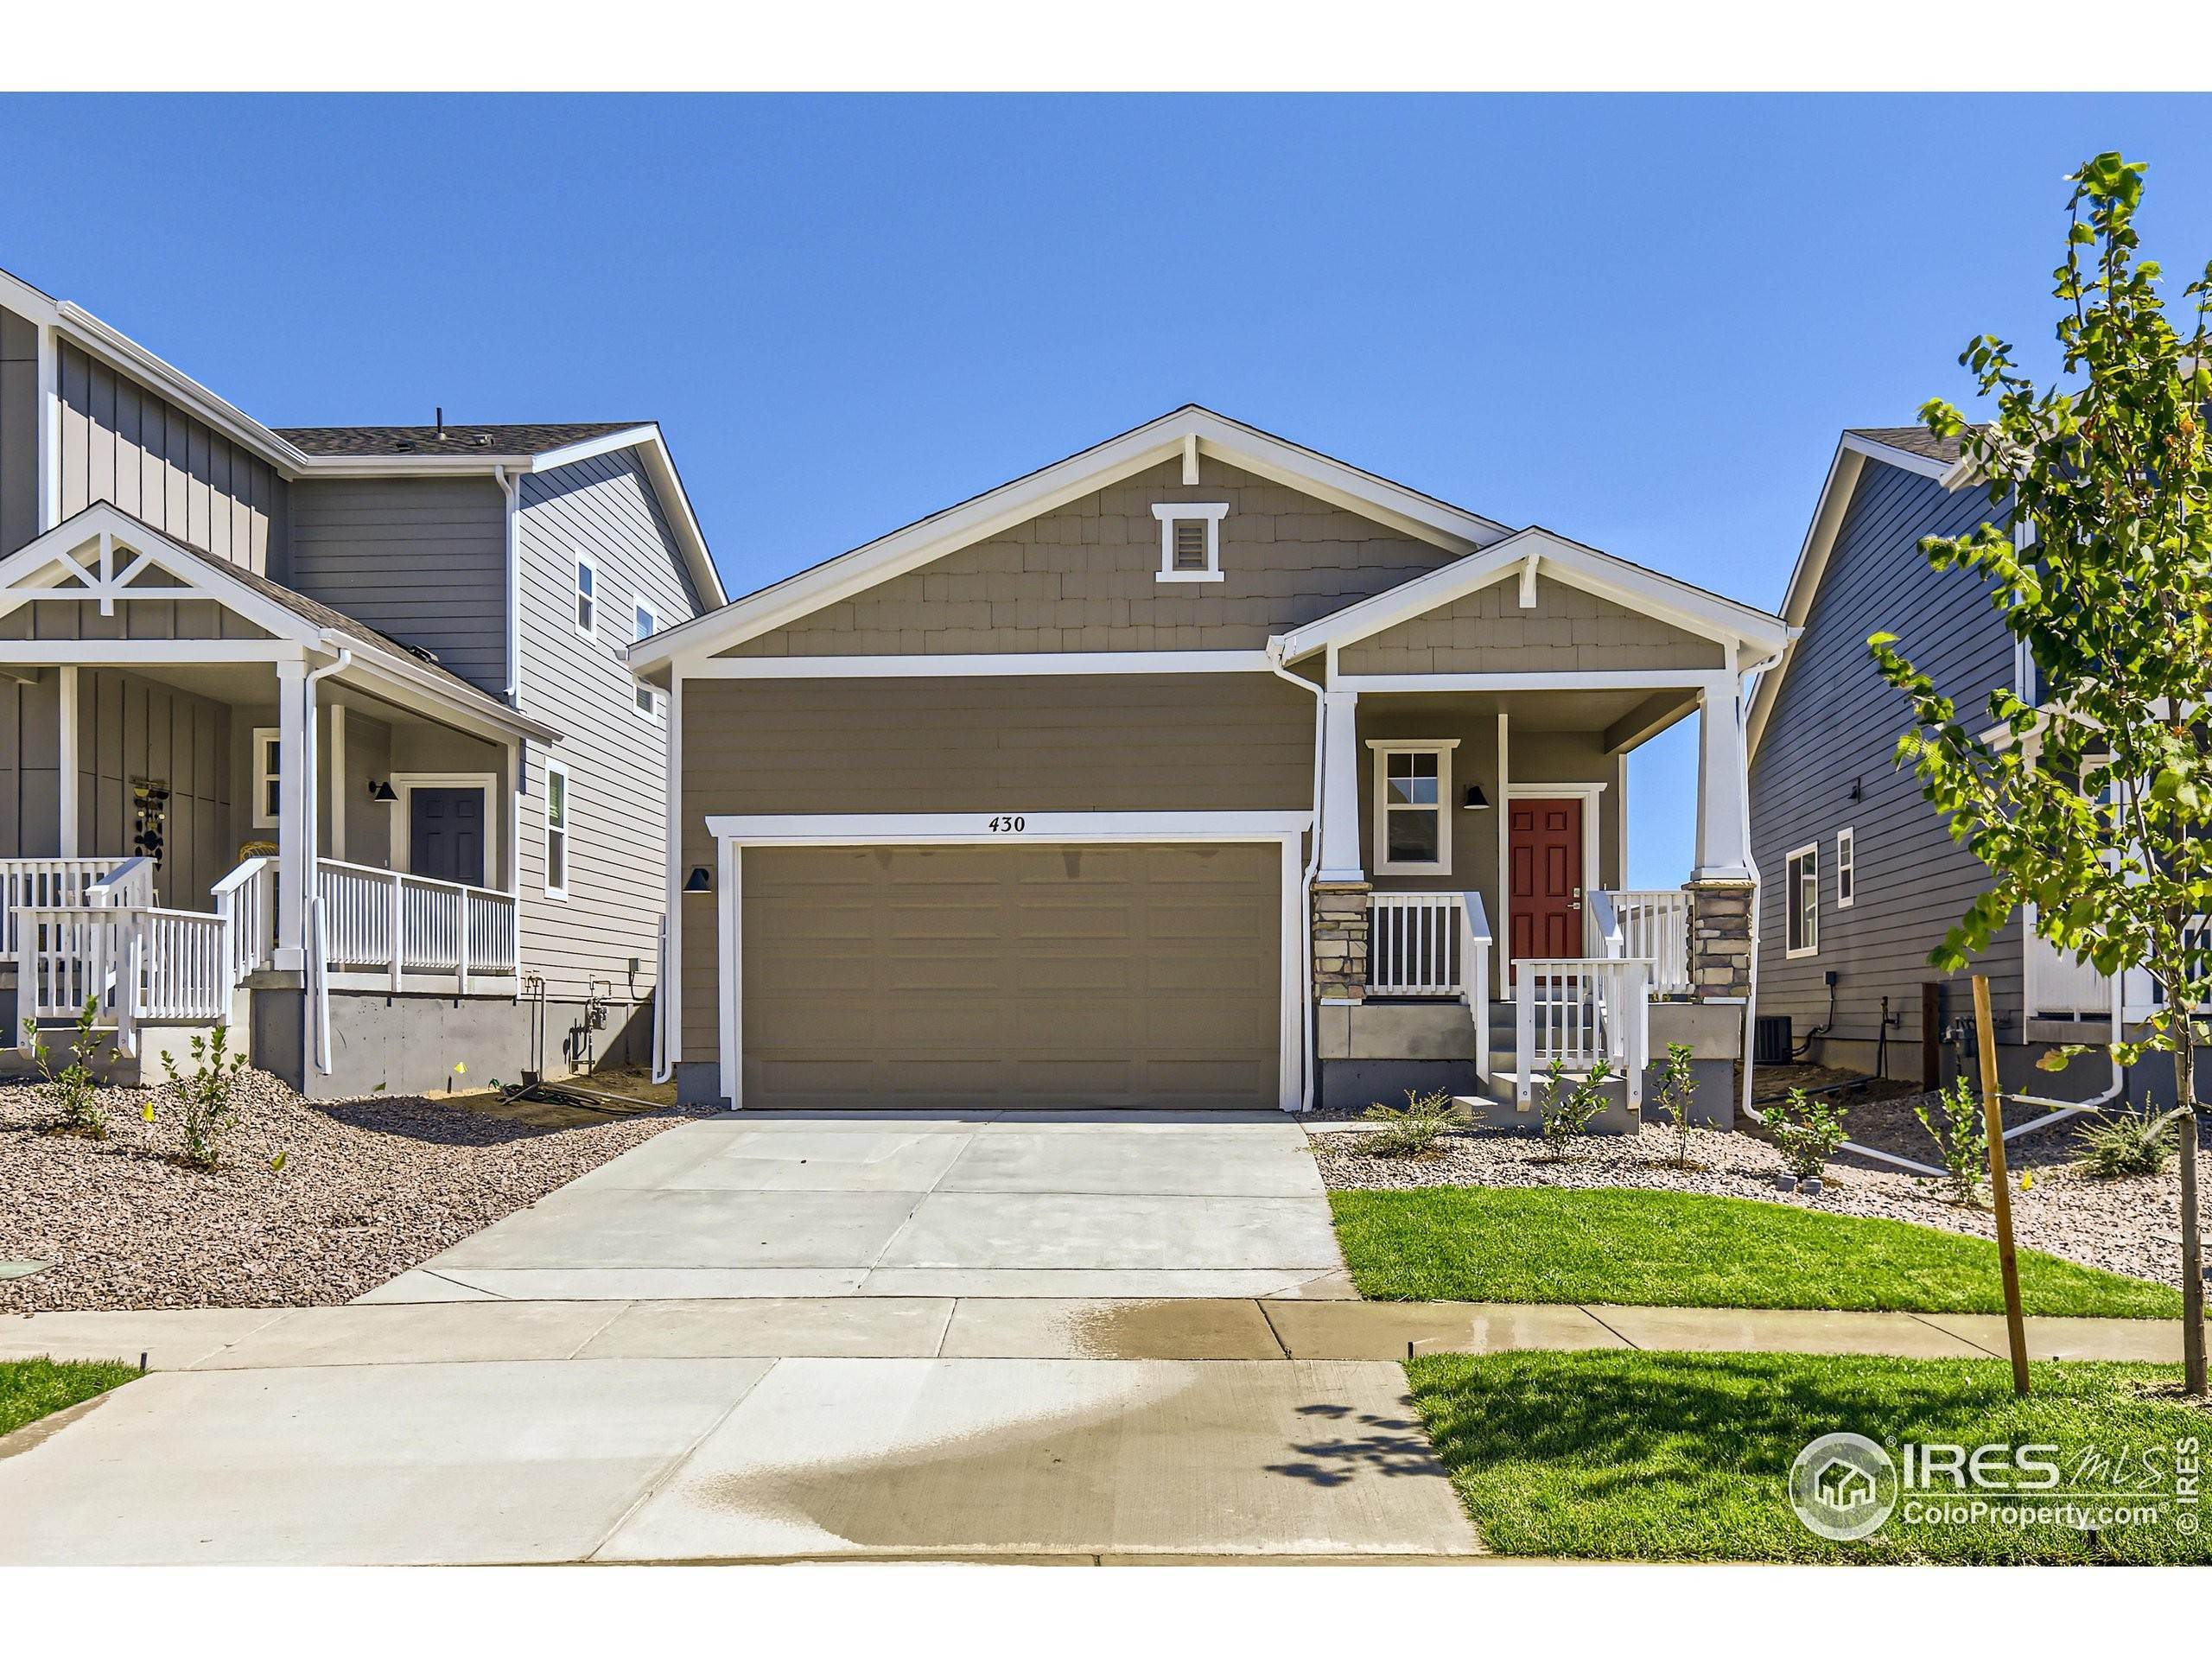 2. Single Family Homes for Active at 430 Overbrook Lane Longmont, Colorado 80504 United States